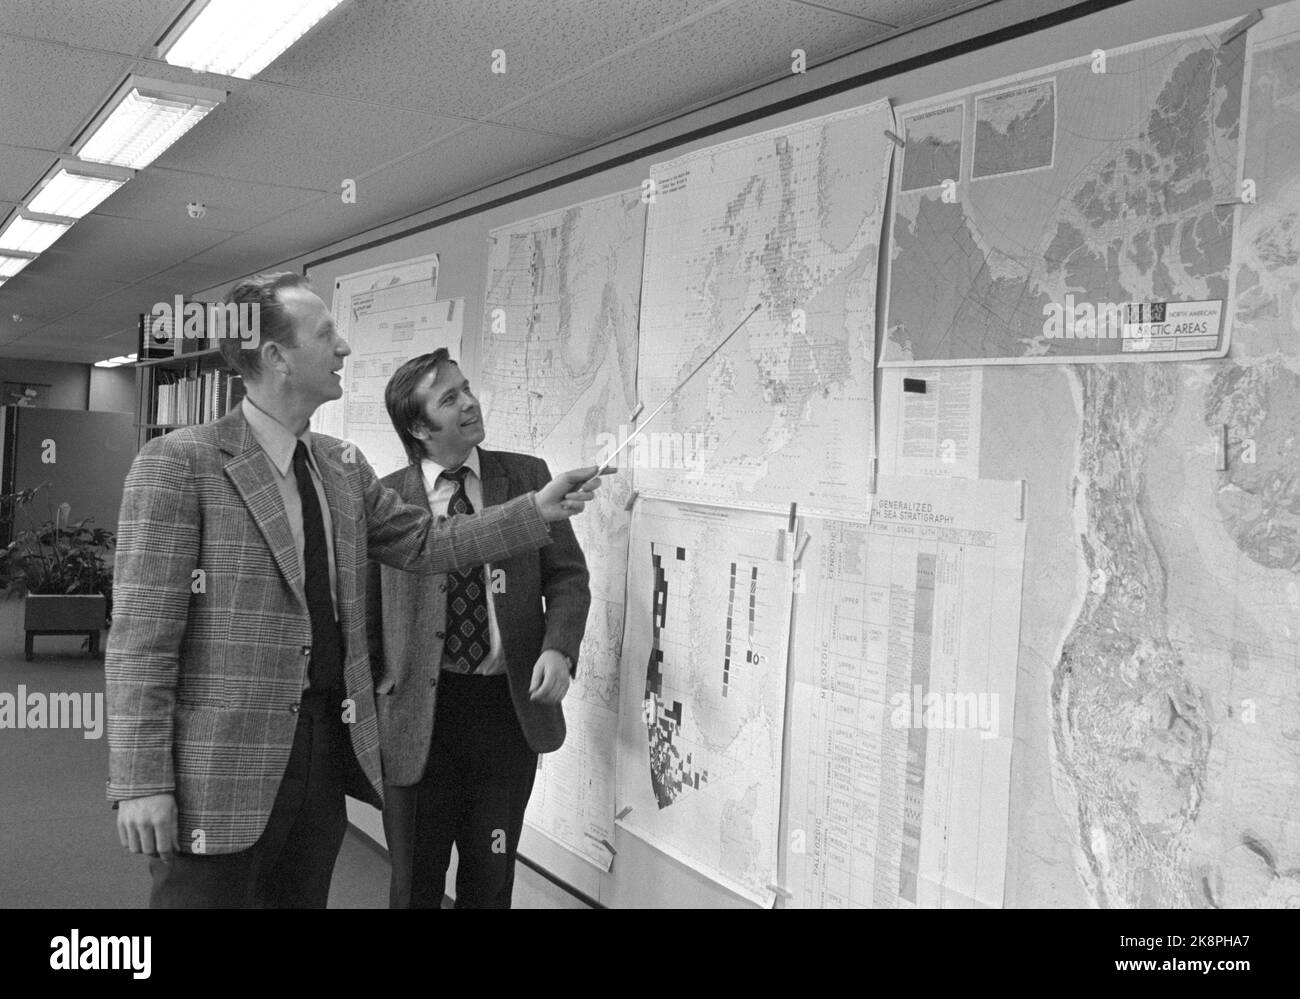 Stavanger 1974 The State and the Oil Millions Discussions about Statoil's organizational form and articles of association. Currently, there are approx. 60 employees in work in the huge office landscapes used by Statoil in Lagårdsveien 80 in Stavanger. Here, director Arve Johnsen (TV) and geophysicist Ingebret Gausland. Photo: Sverre A. Børretzen / Current / NTB Stock Photo